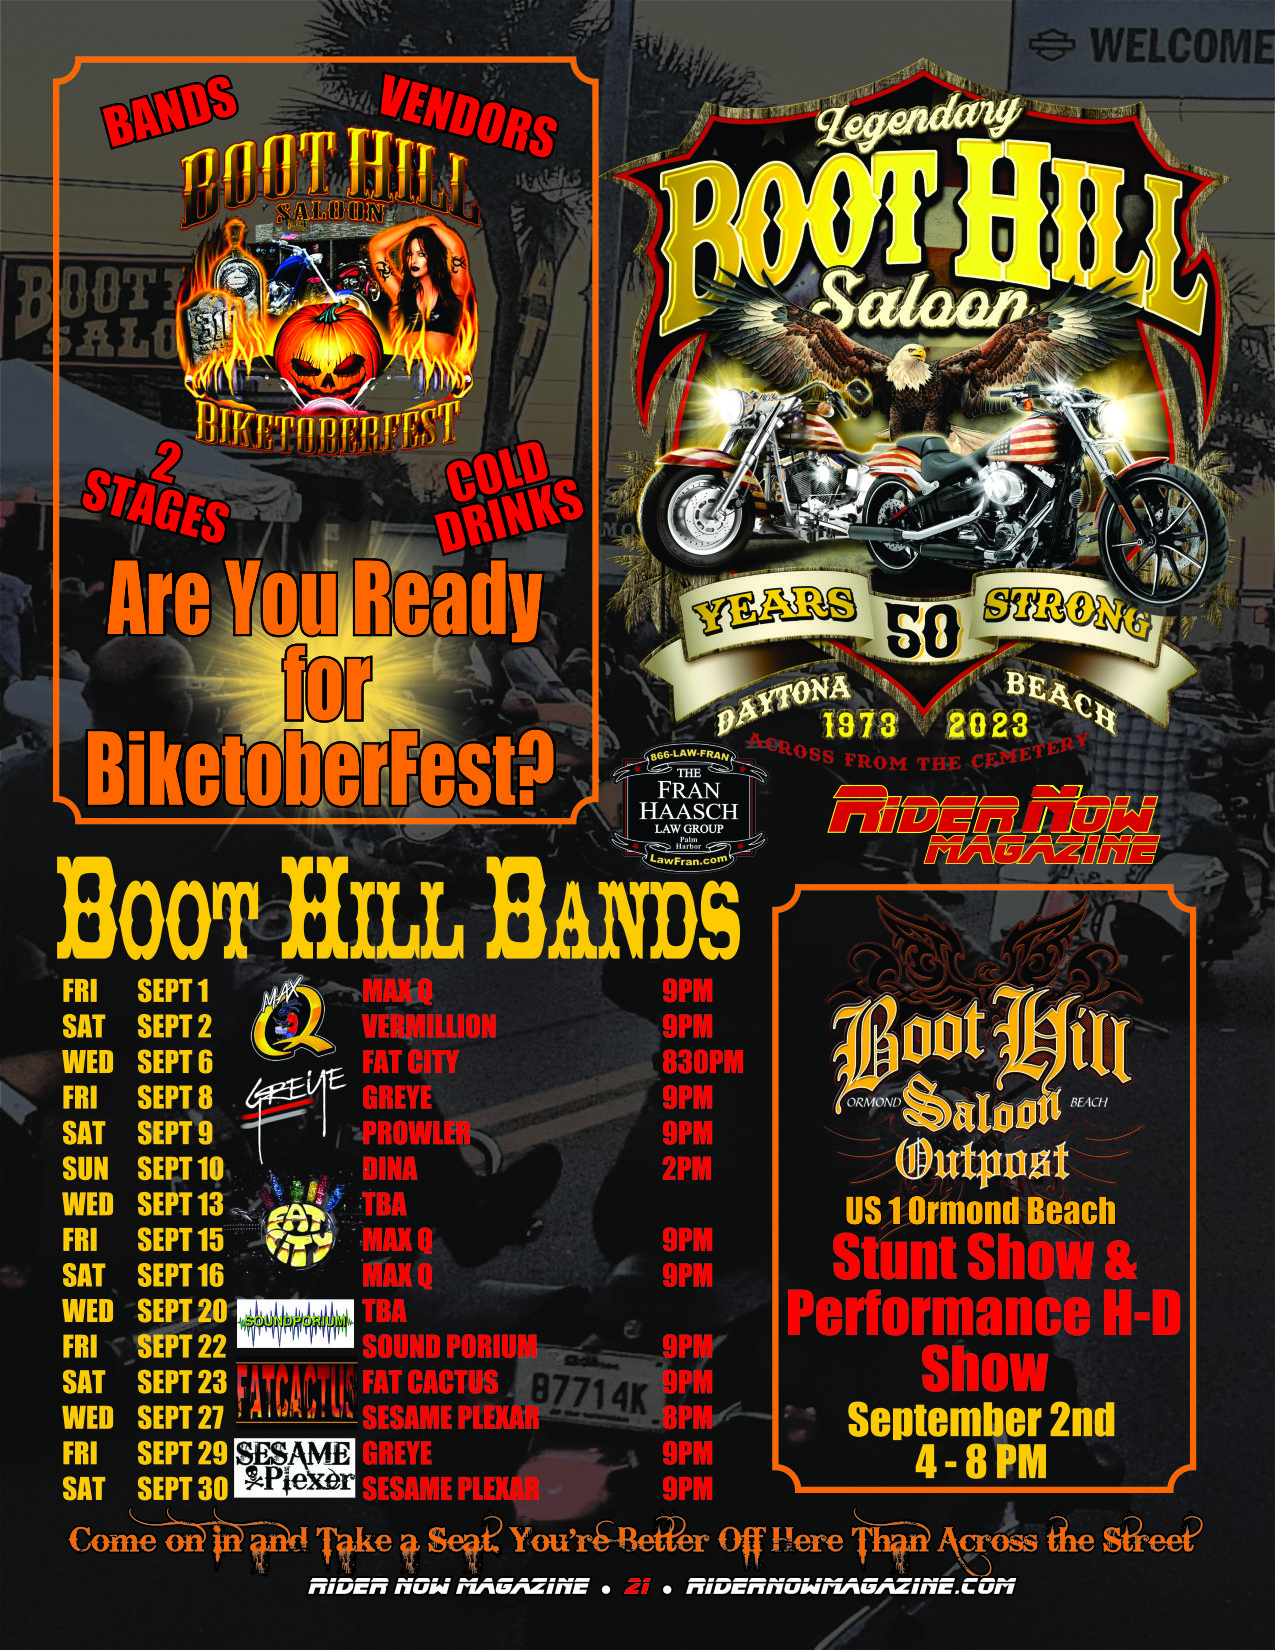 The Legendary Boot Hill Saloon